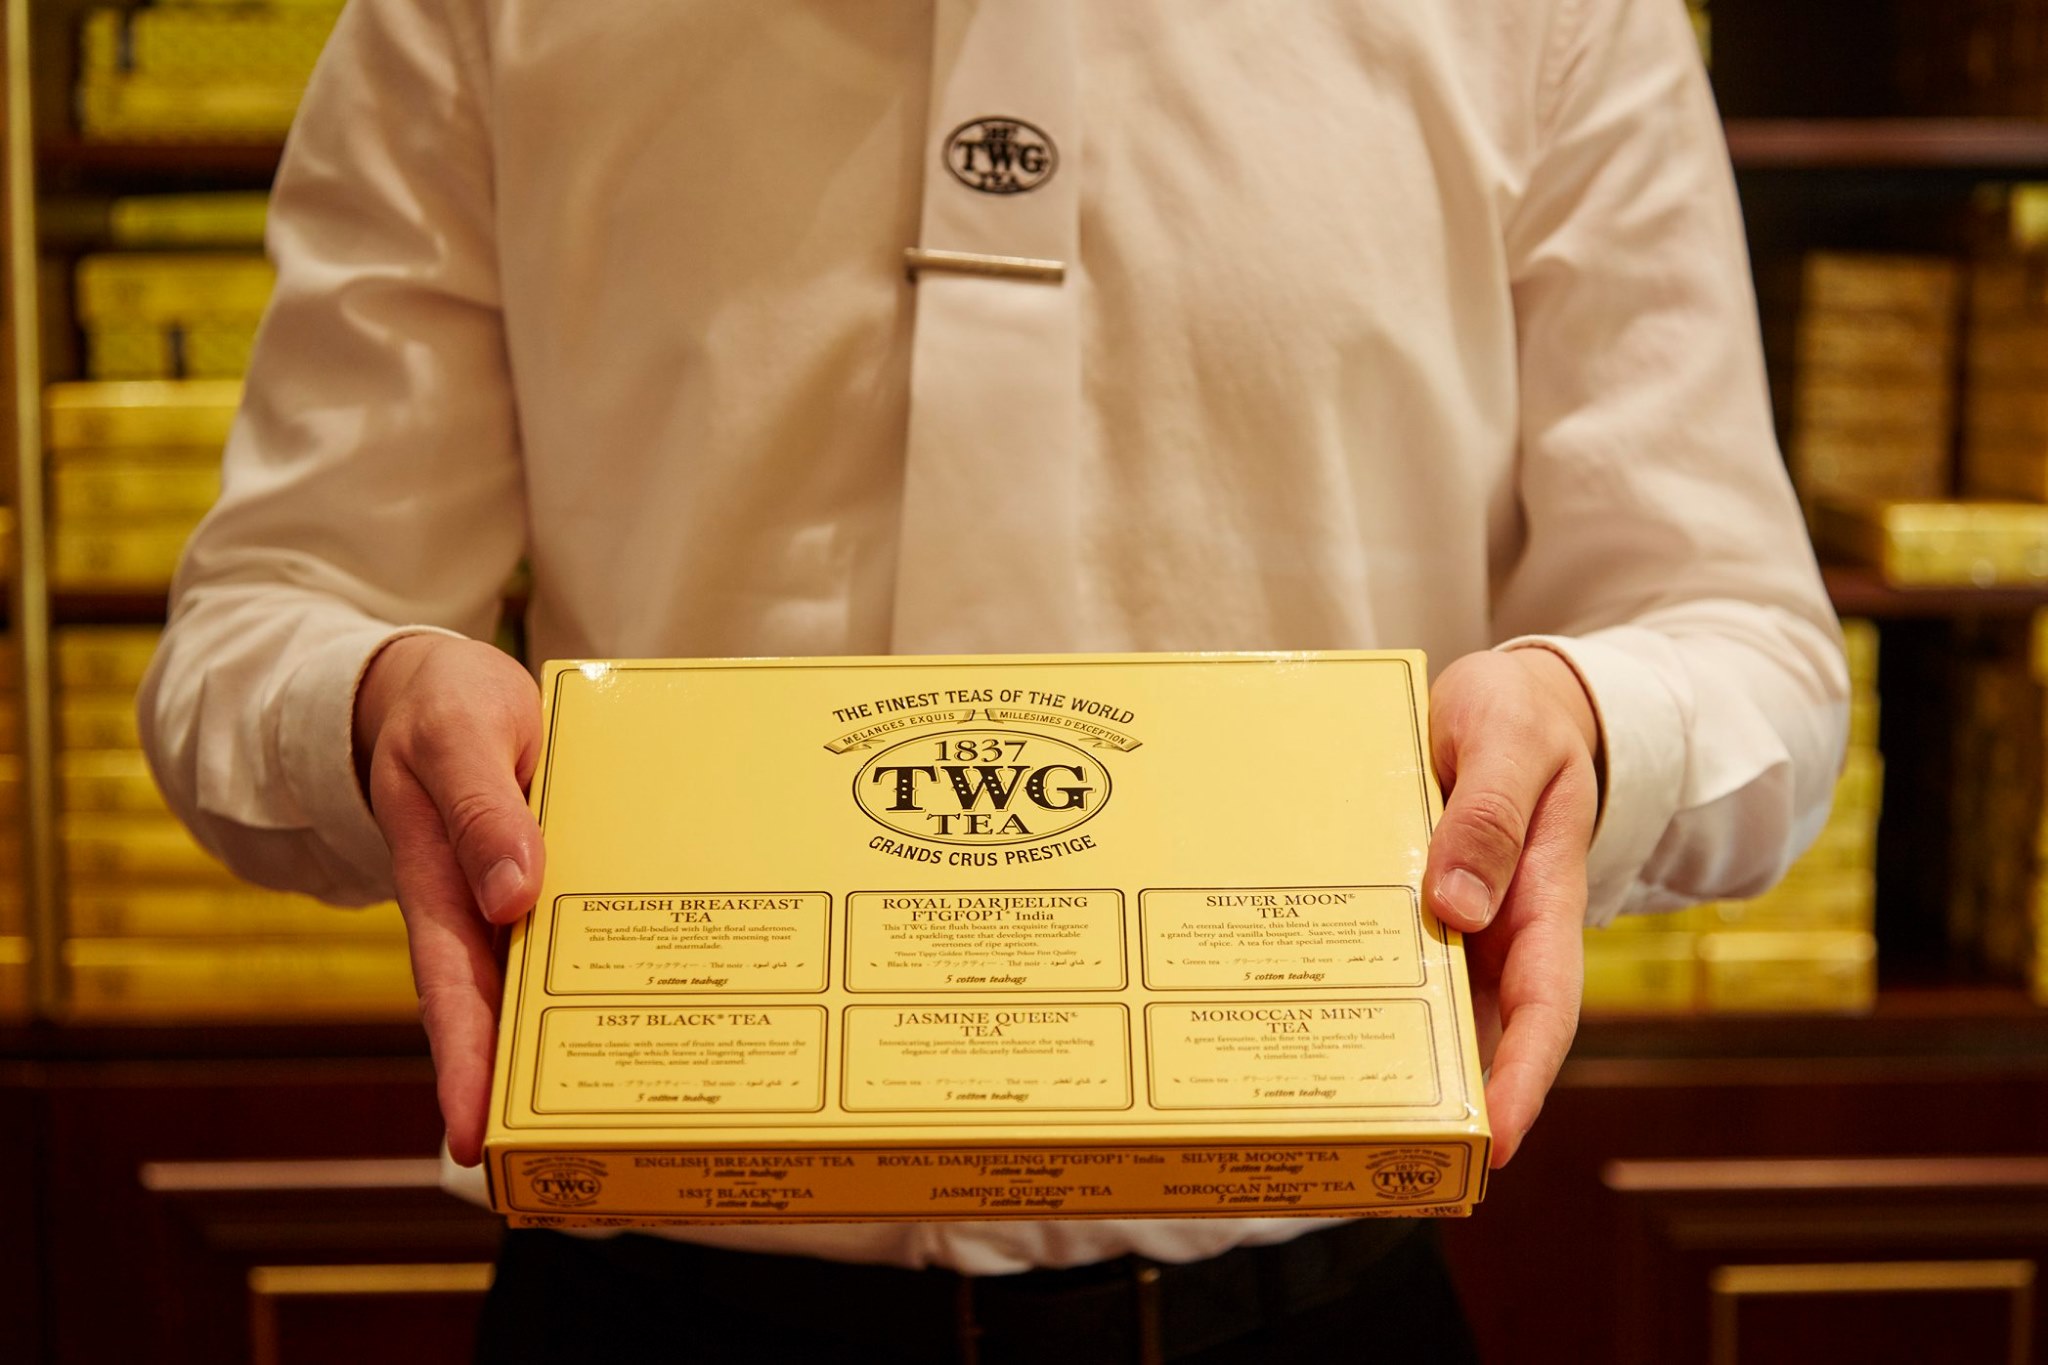 One of TWG Tea  best-sellers, the Empire Tea Selection, entirely hand-sewn from 100% cotton containing 6 different types of whole-leaf fine harvests and exclusive tea blends, displayed in a magnificent gift box.